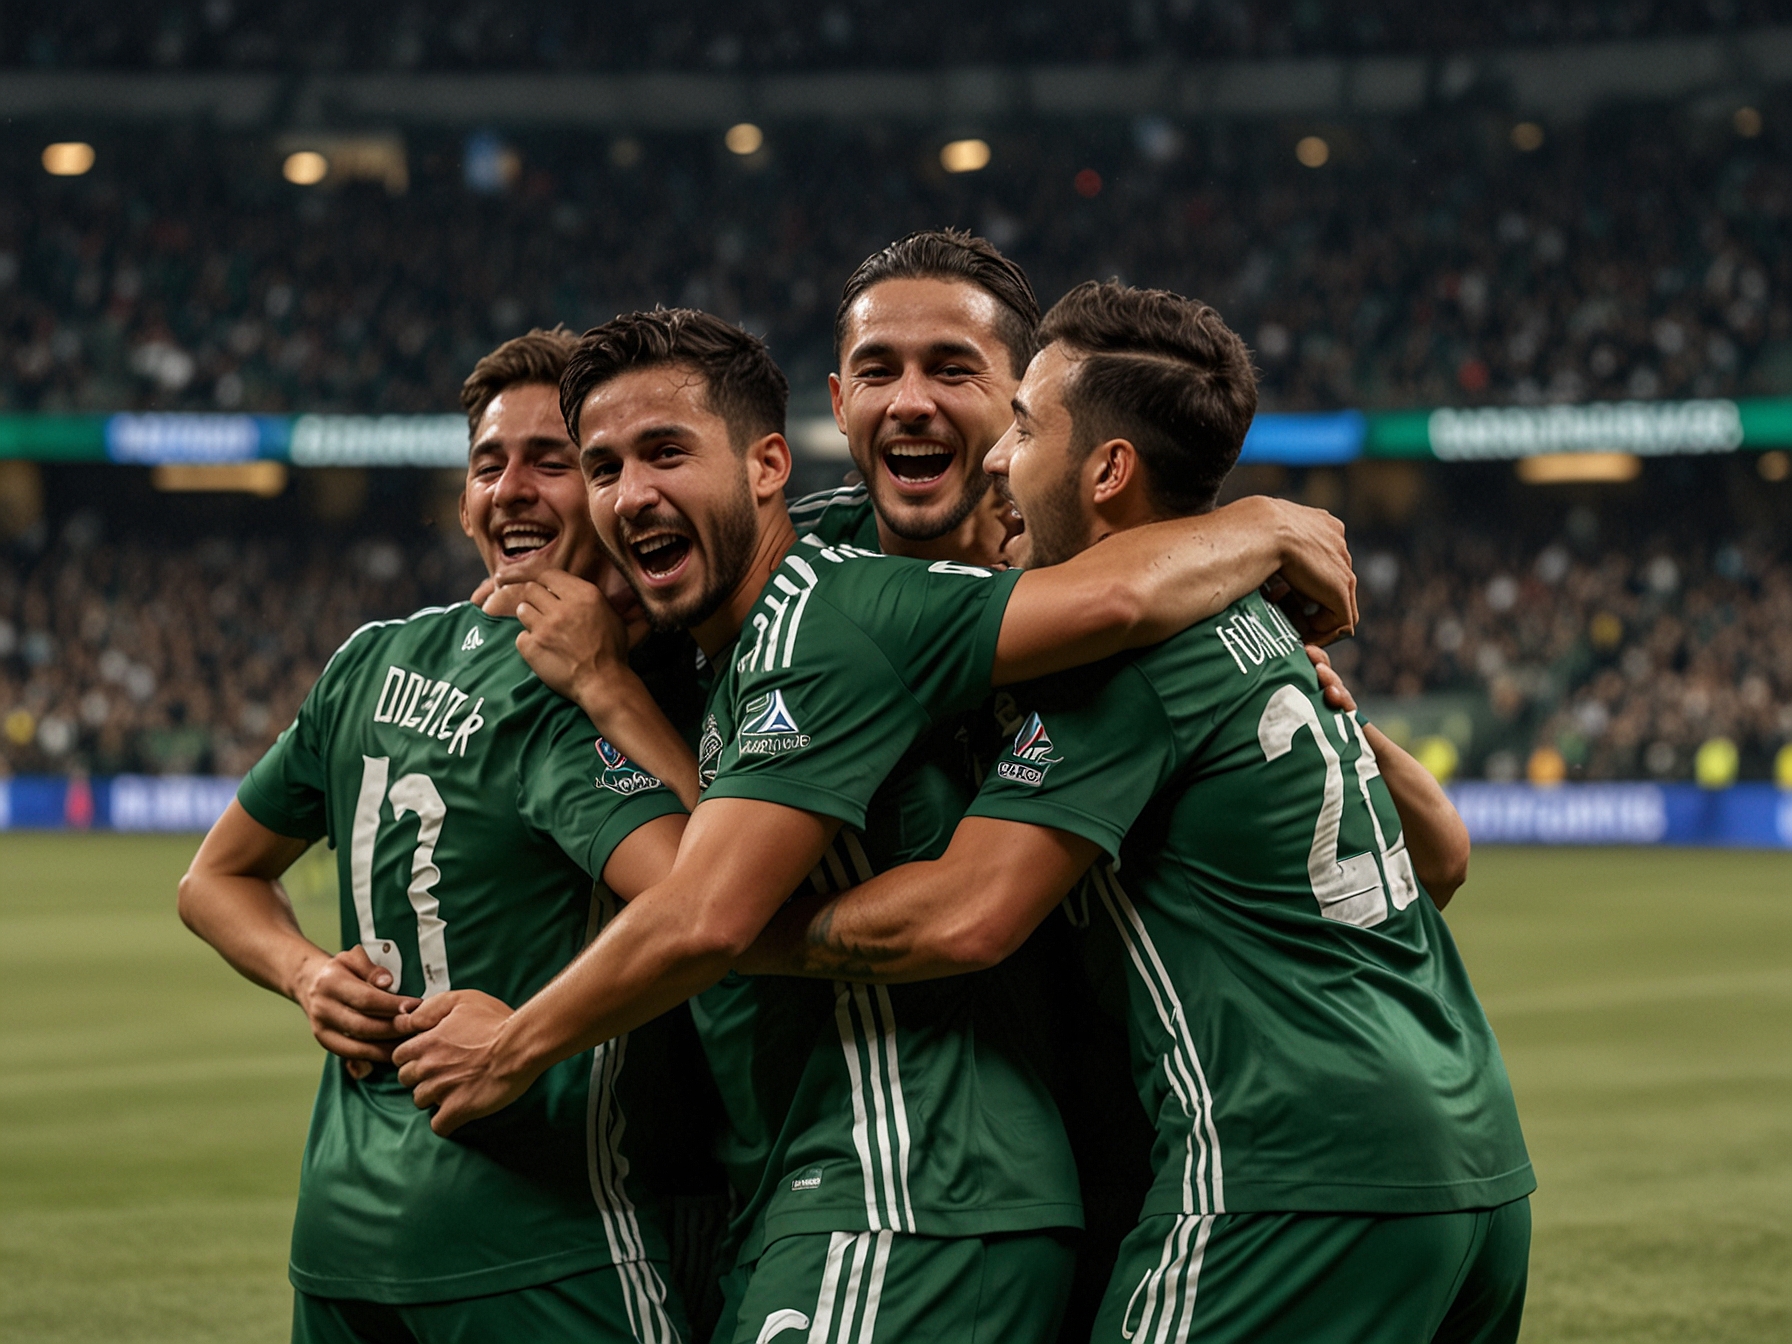 Jonathan Rodriguez of Portland Timbers celebrates with teammates after scoring the last-minute winning goal against Minnesota United, capturing the team's jubilant moment at Providence Park.